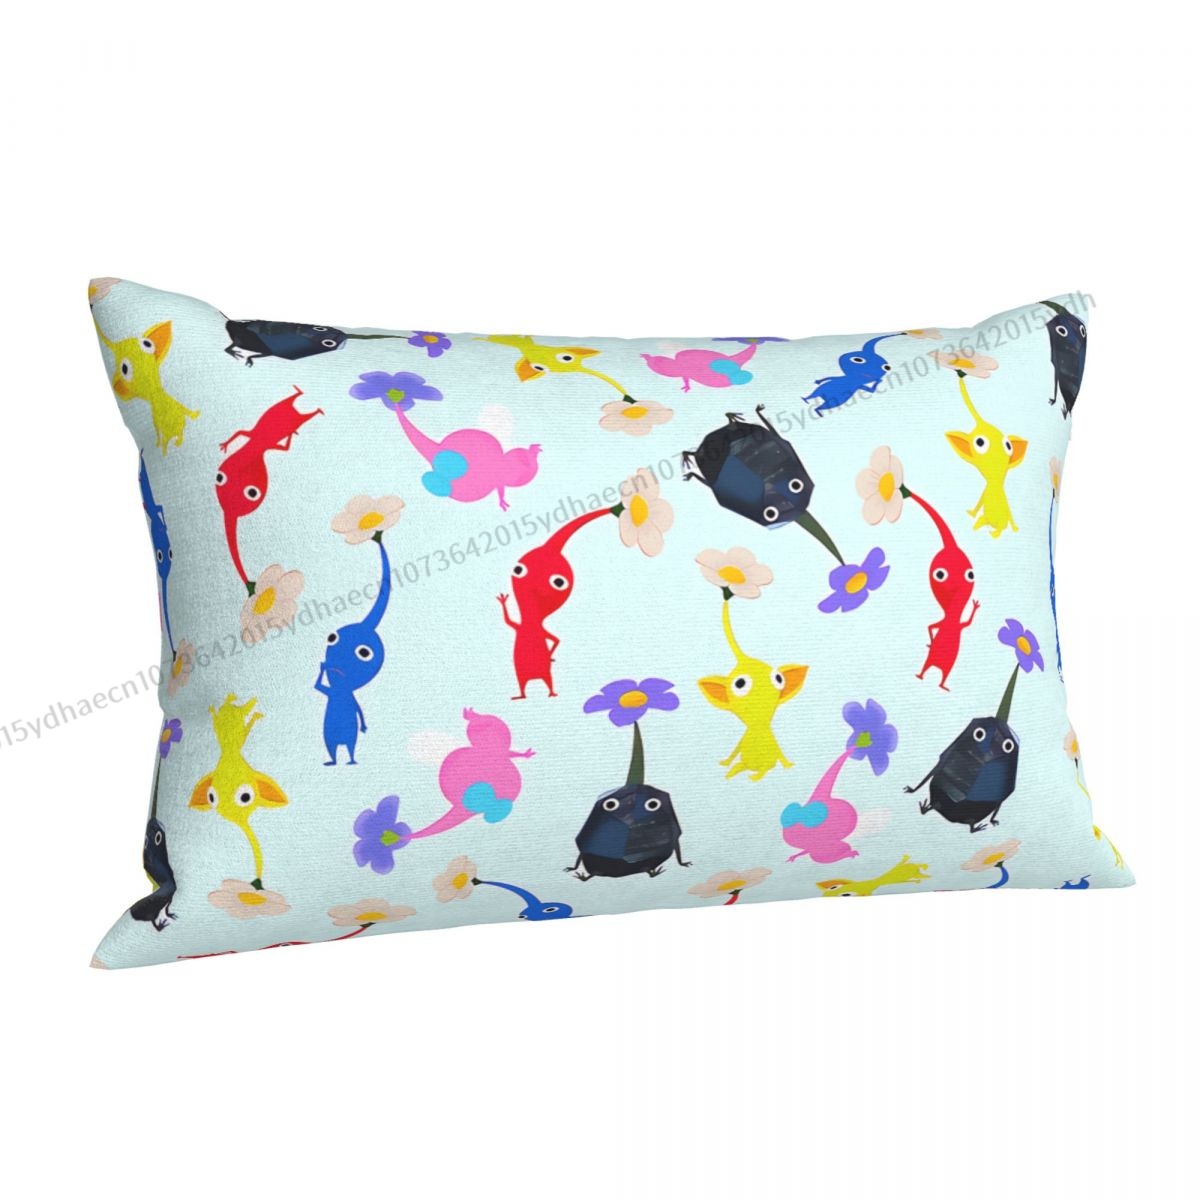 Characters Cojines Pillowcase Pikmin Game Cushion Home Sofa Chair Print Decorative Coussin Pillow Covers 1 - Pikmin Plush